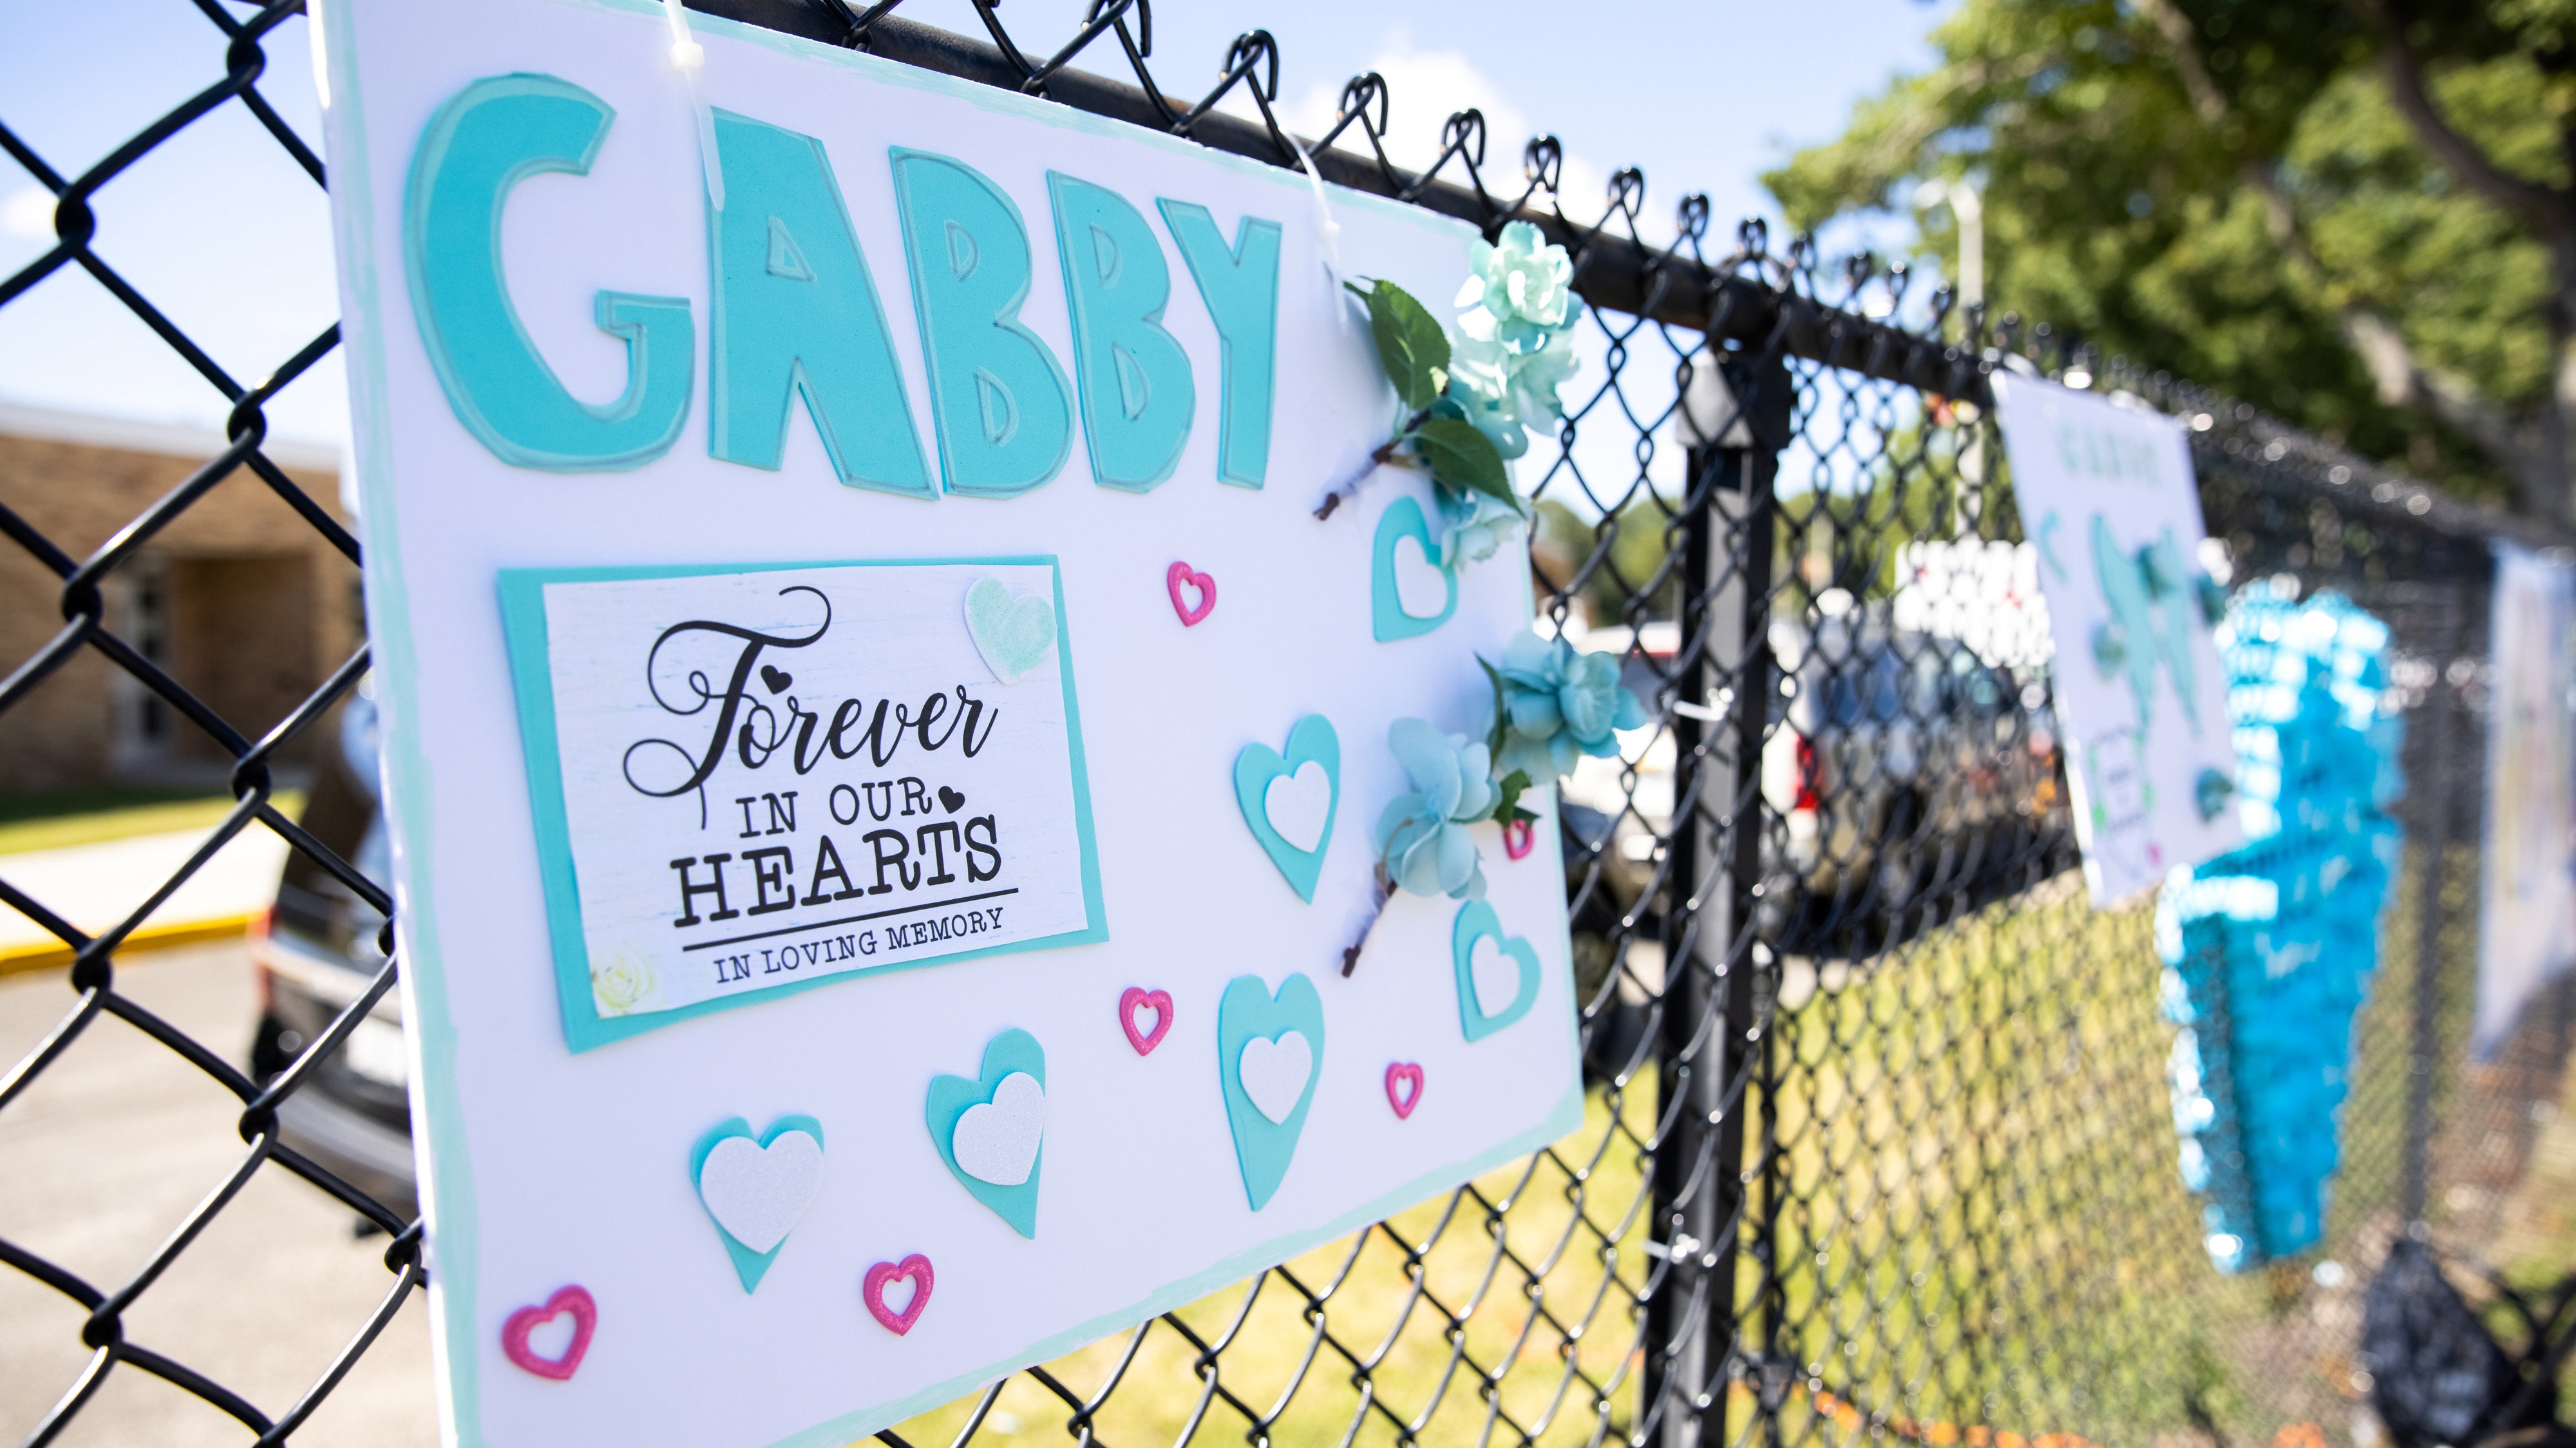 How parents should talk to kids about Gabby Petito: Expert weighs in